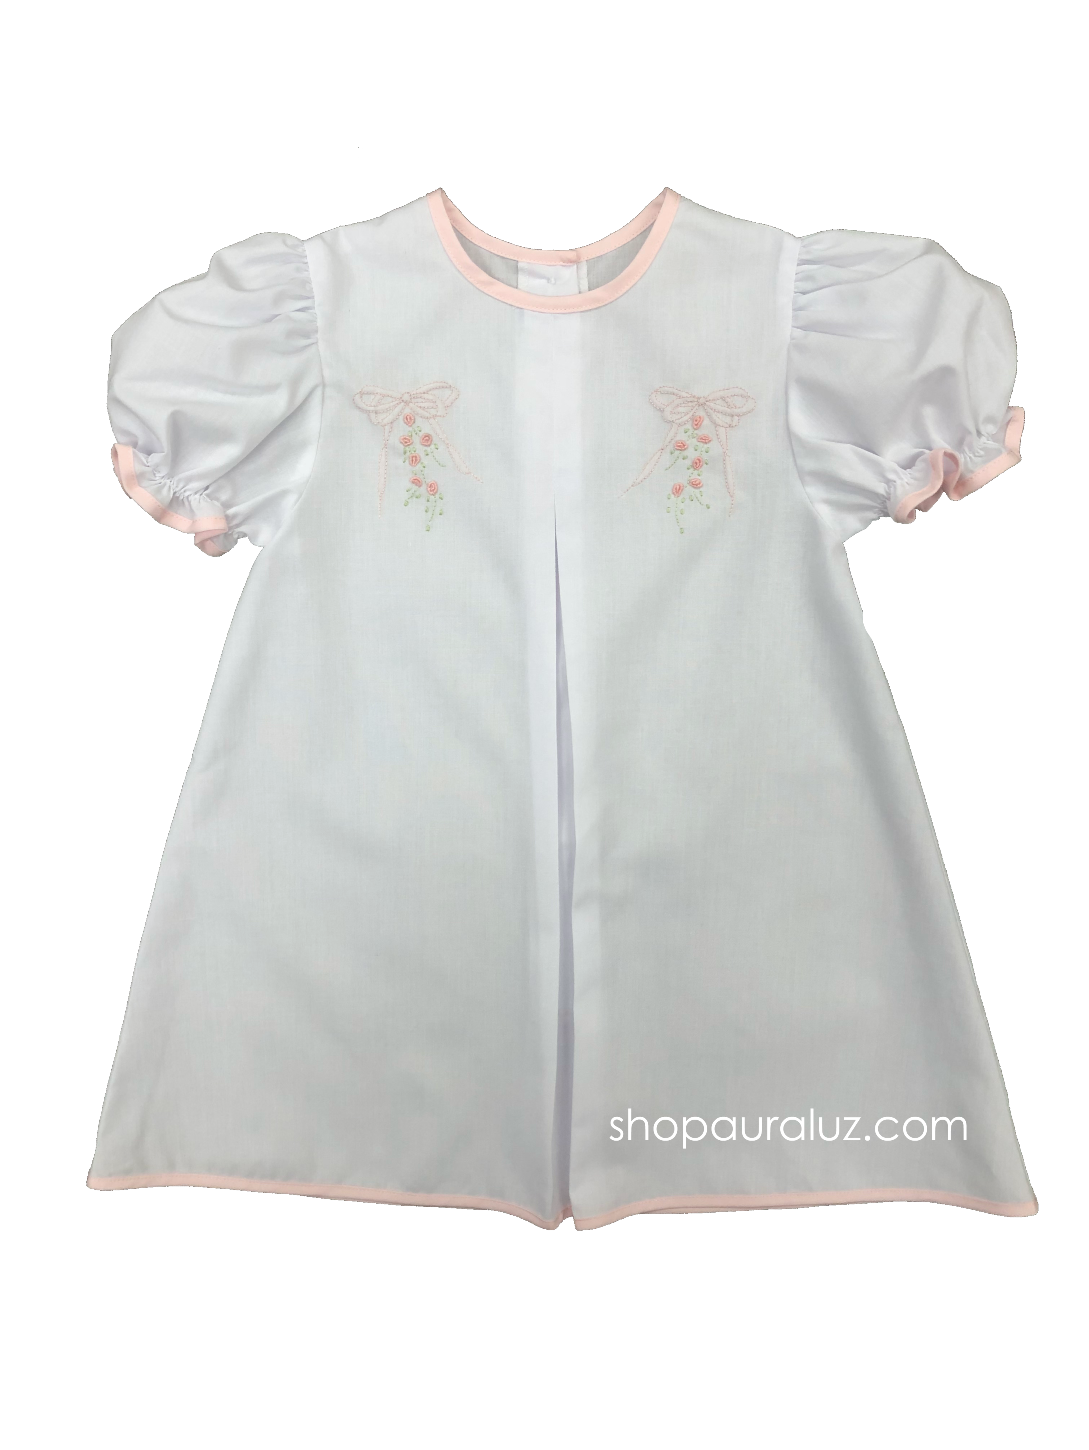 Auraluz Baby Dress. White with pink binding trim and embroidered bows